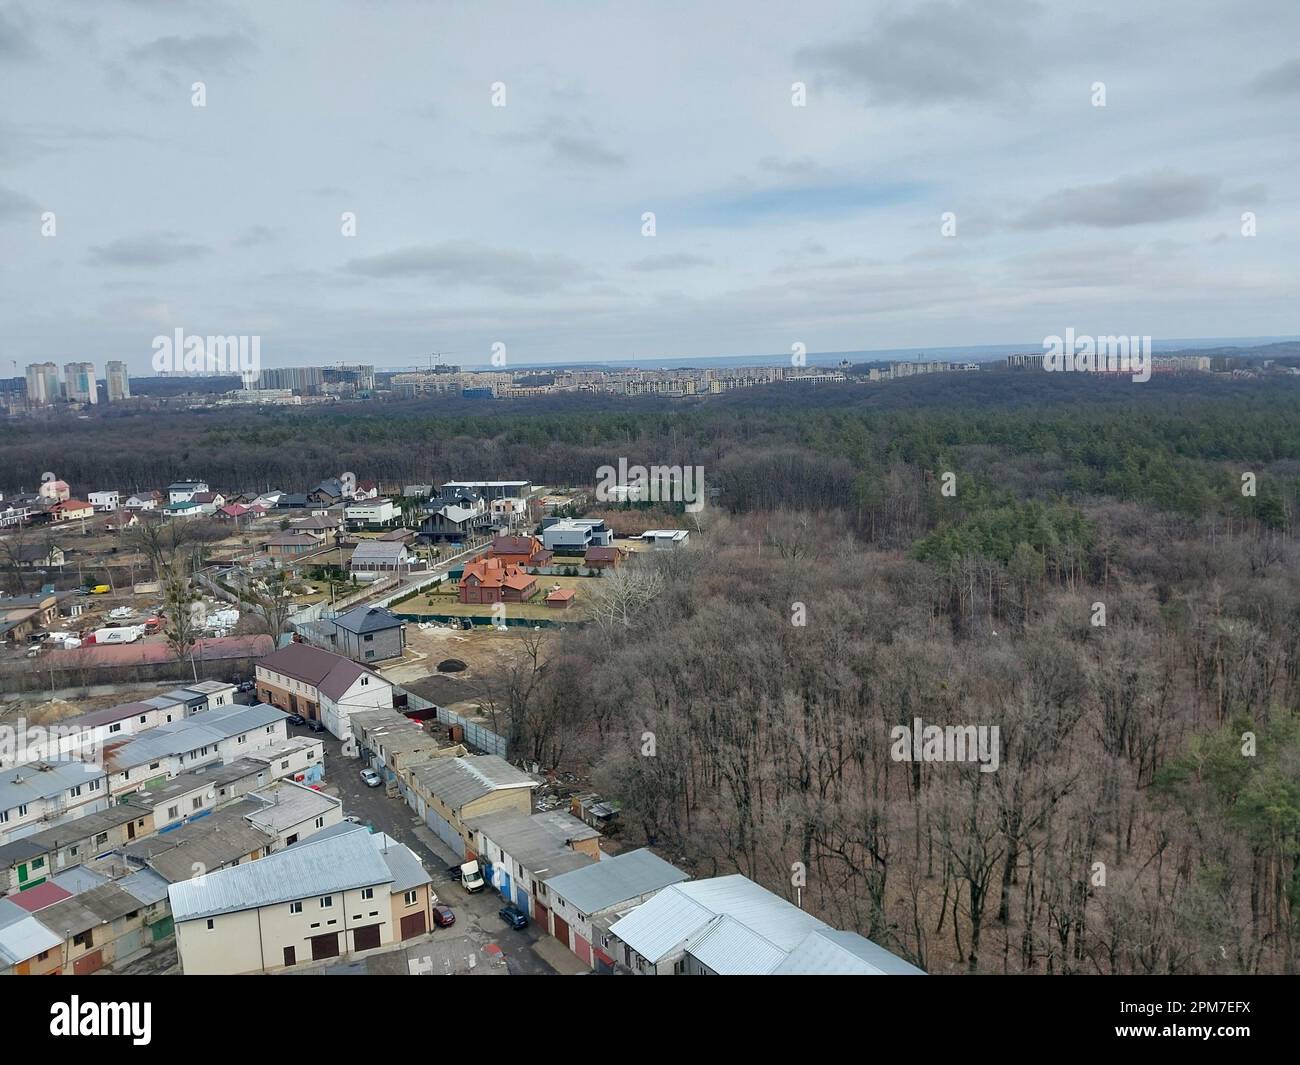 Panorama of the city from the height of a the multi-storey building. Stock Photo